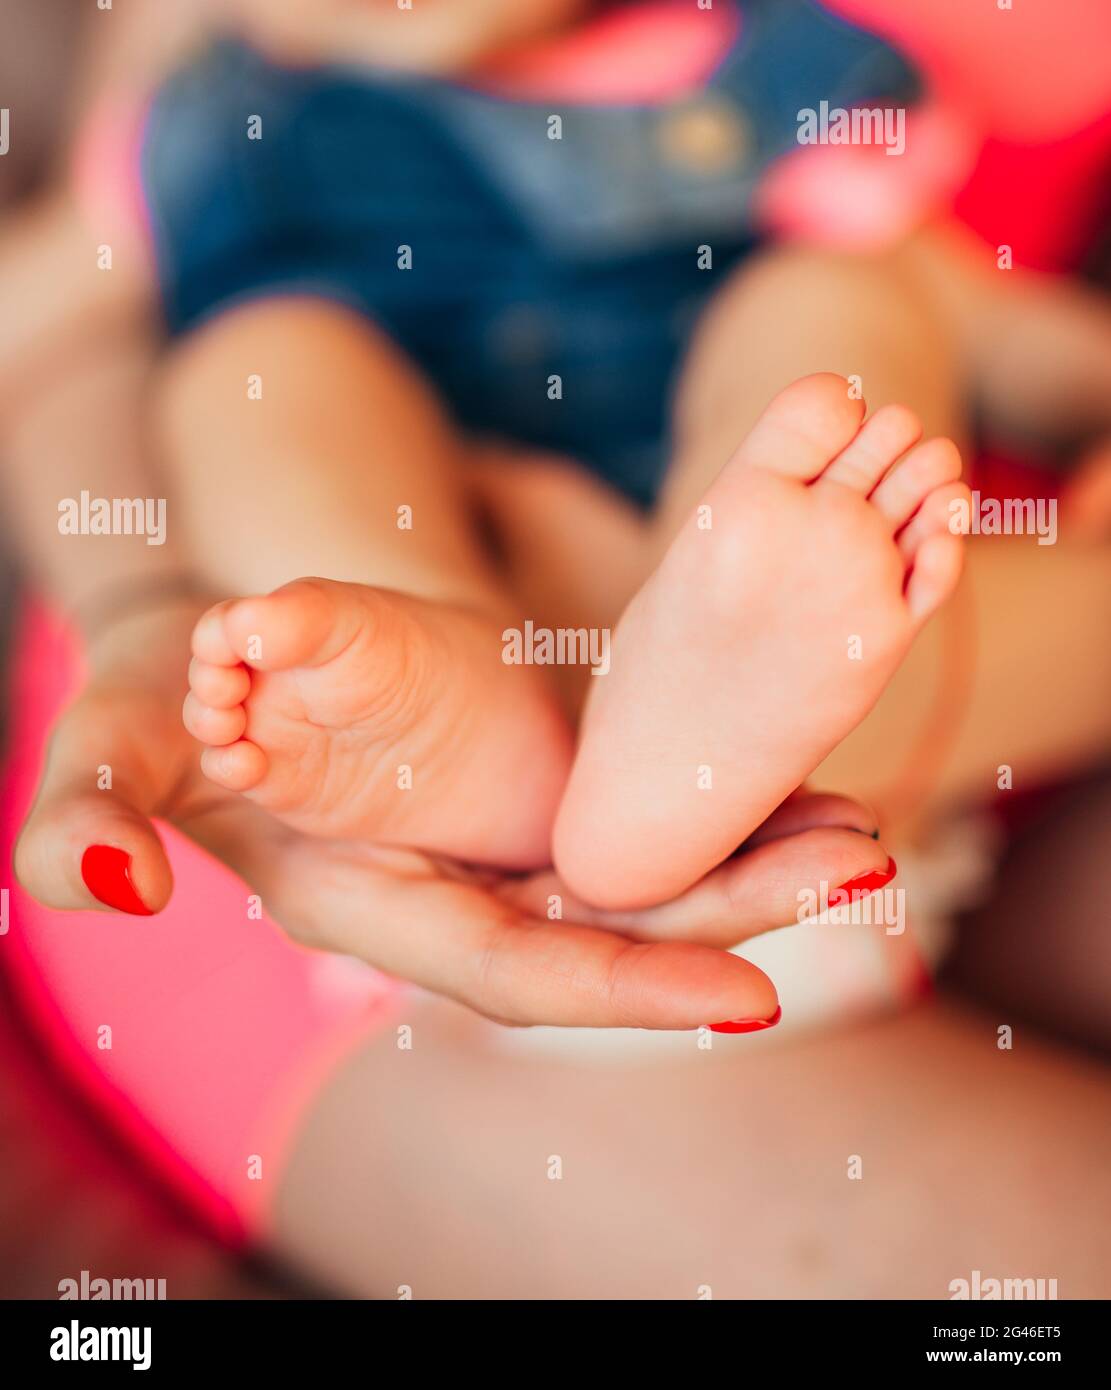 Baby foot stock photo. Image of life, happiness, domestic - 56746002